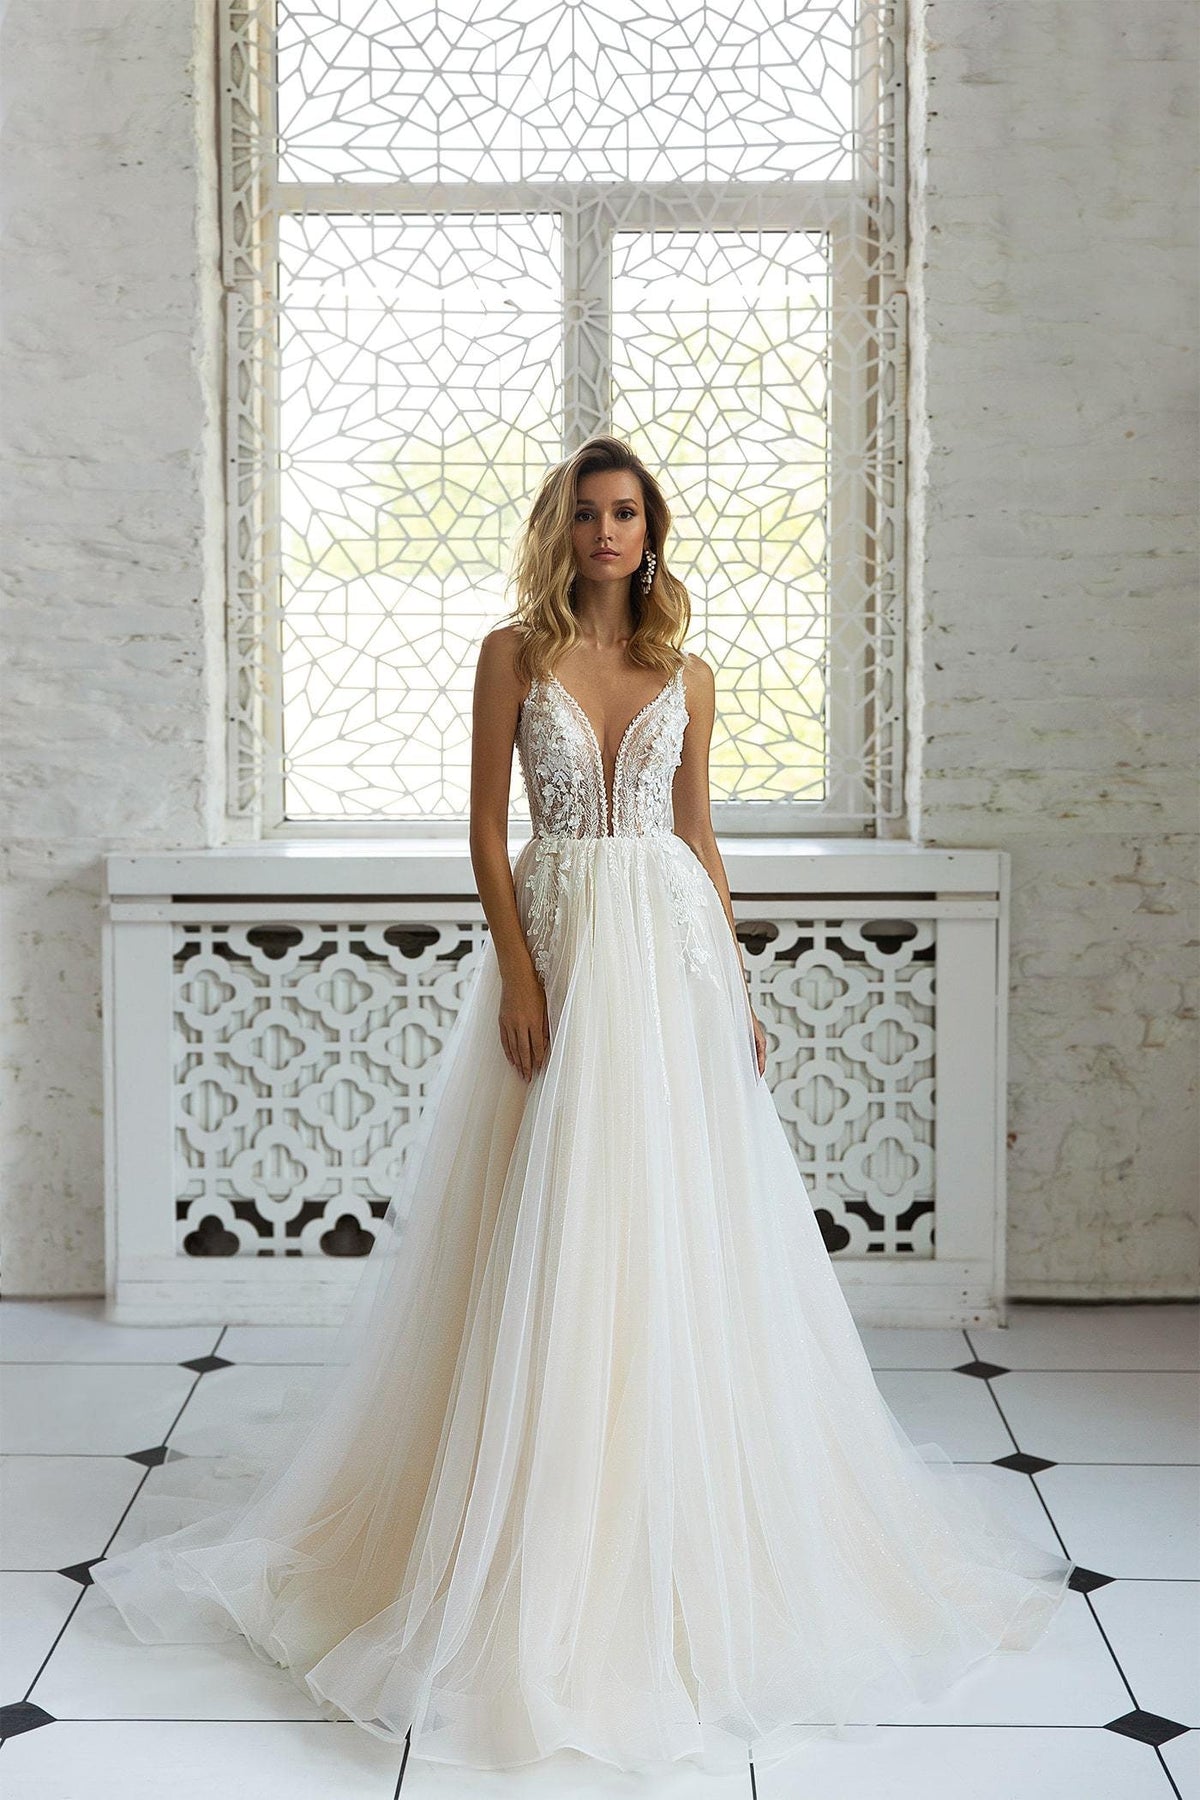 Beautiful Sleeveless Deep V Neckline Wedding Dress Bridal Gown Open Back Ivory Champagne Lace Aline Dress with Straps Train Modern Design